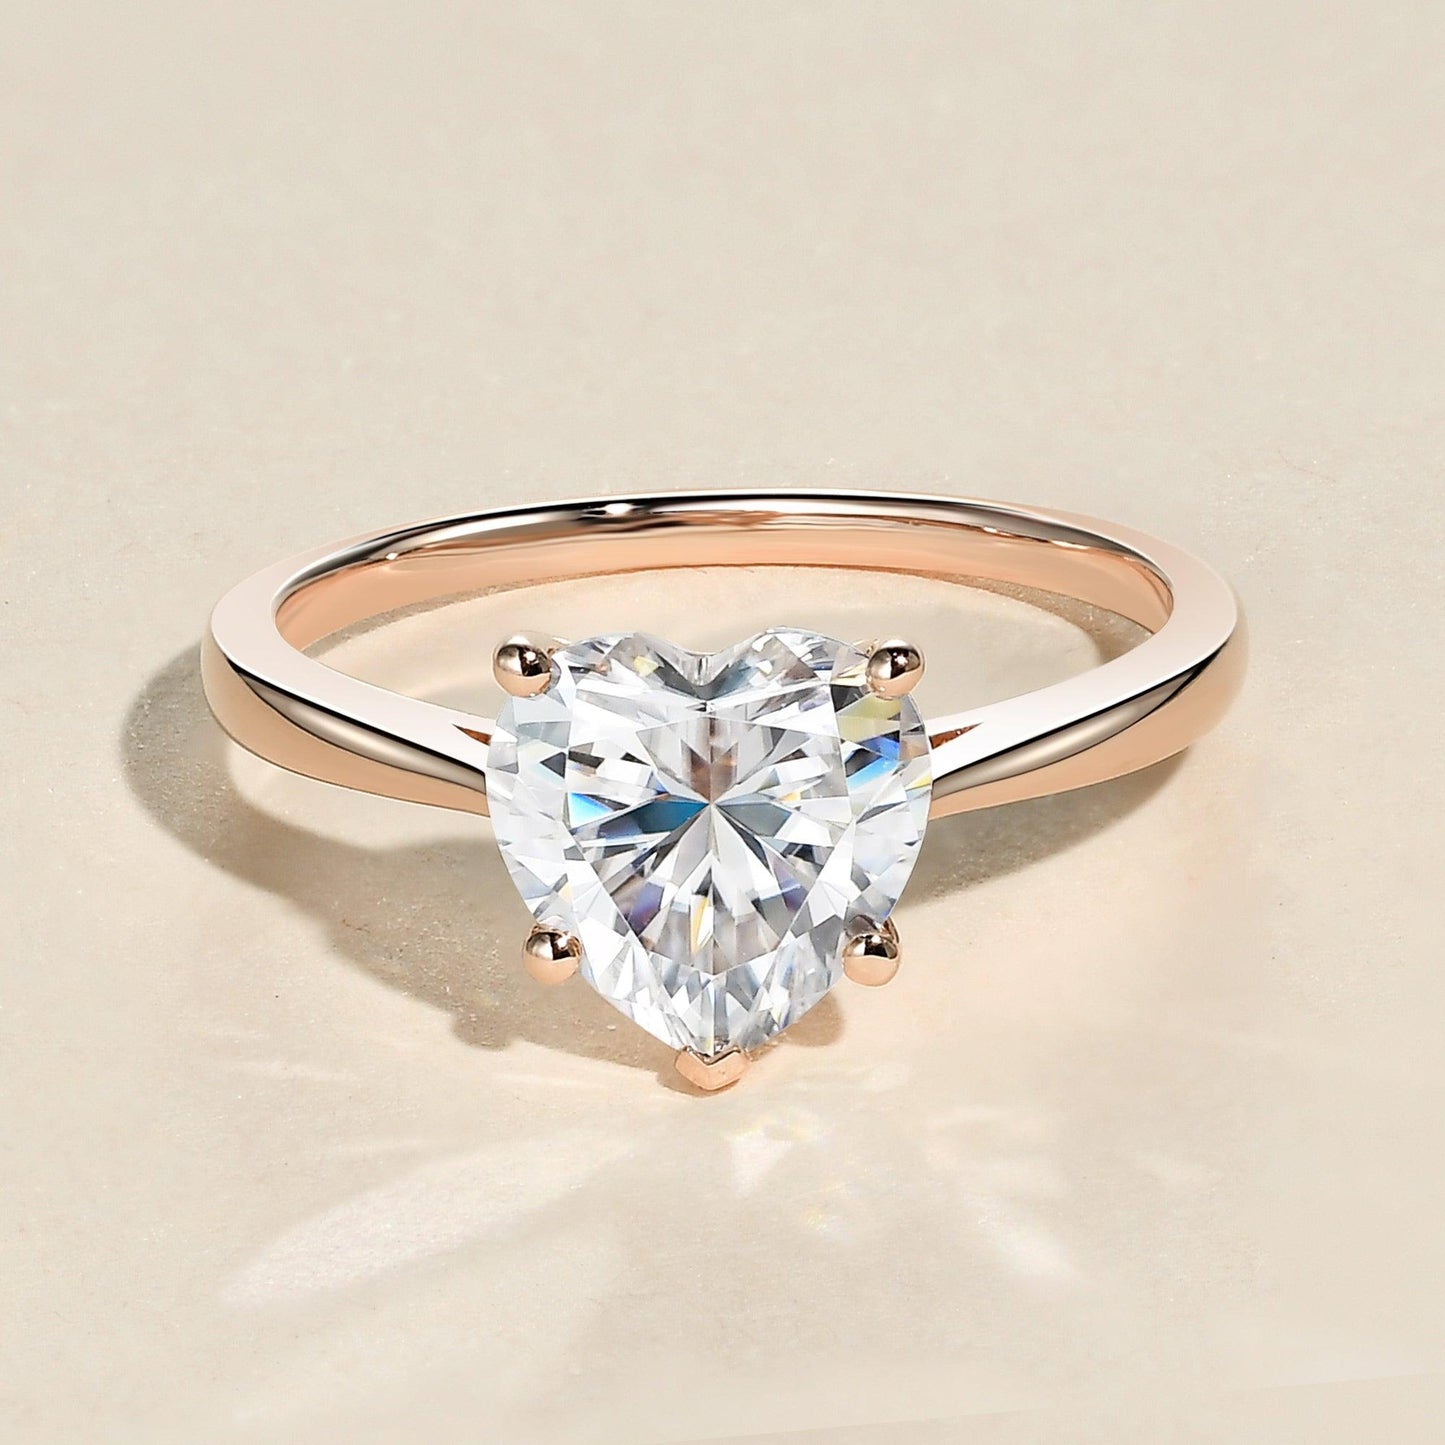 2.0 CT Heart Cut Solitaire Moissanite Engagement Ring